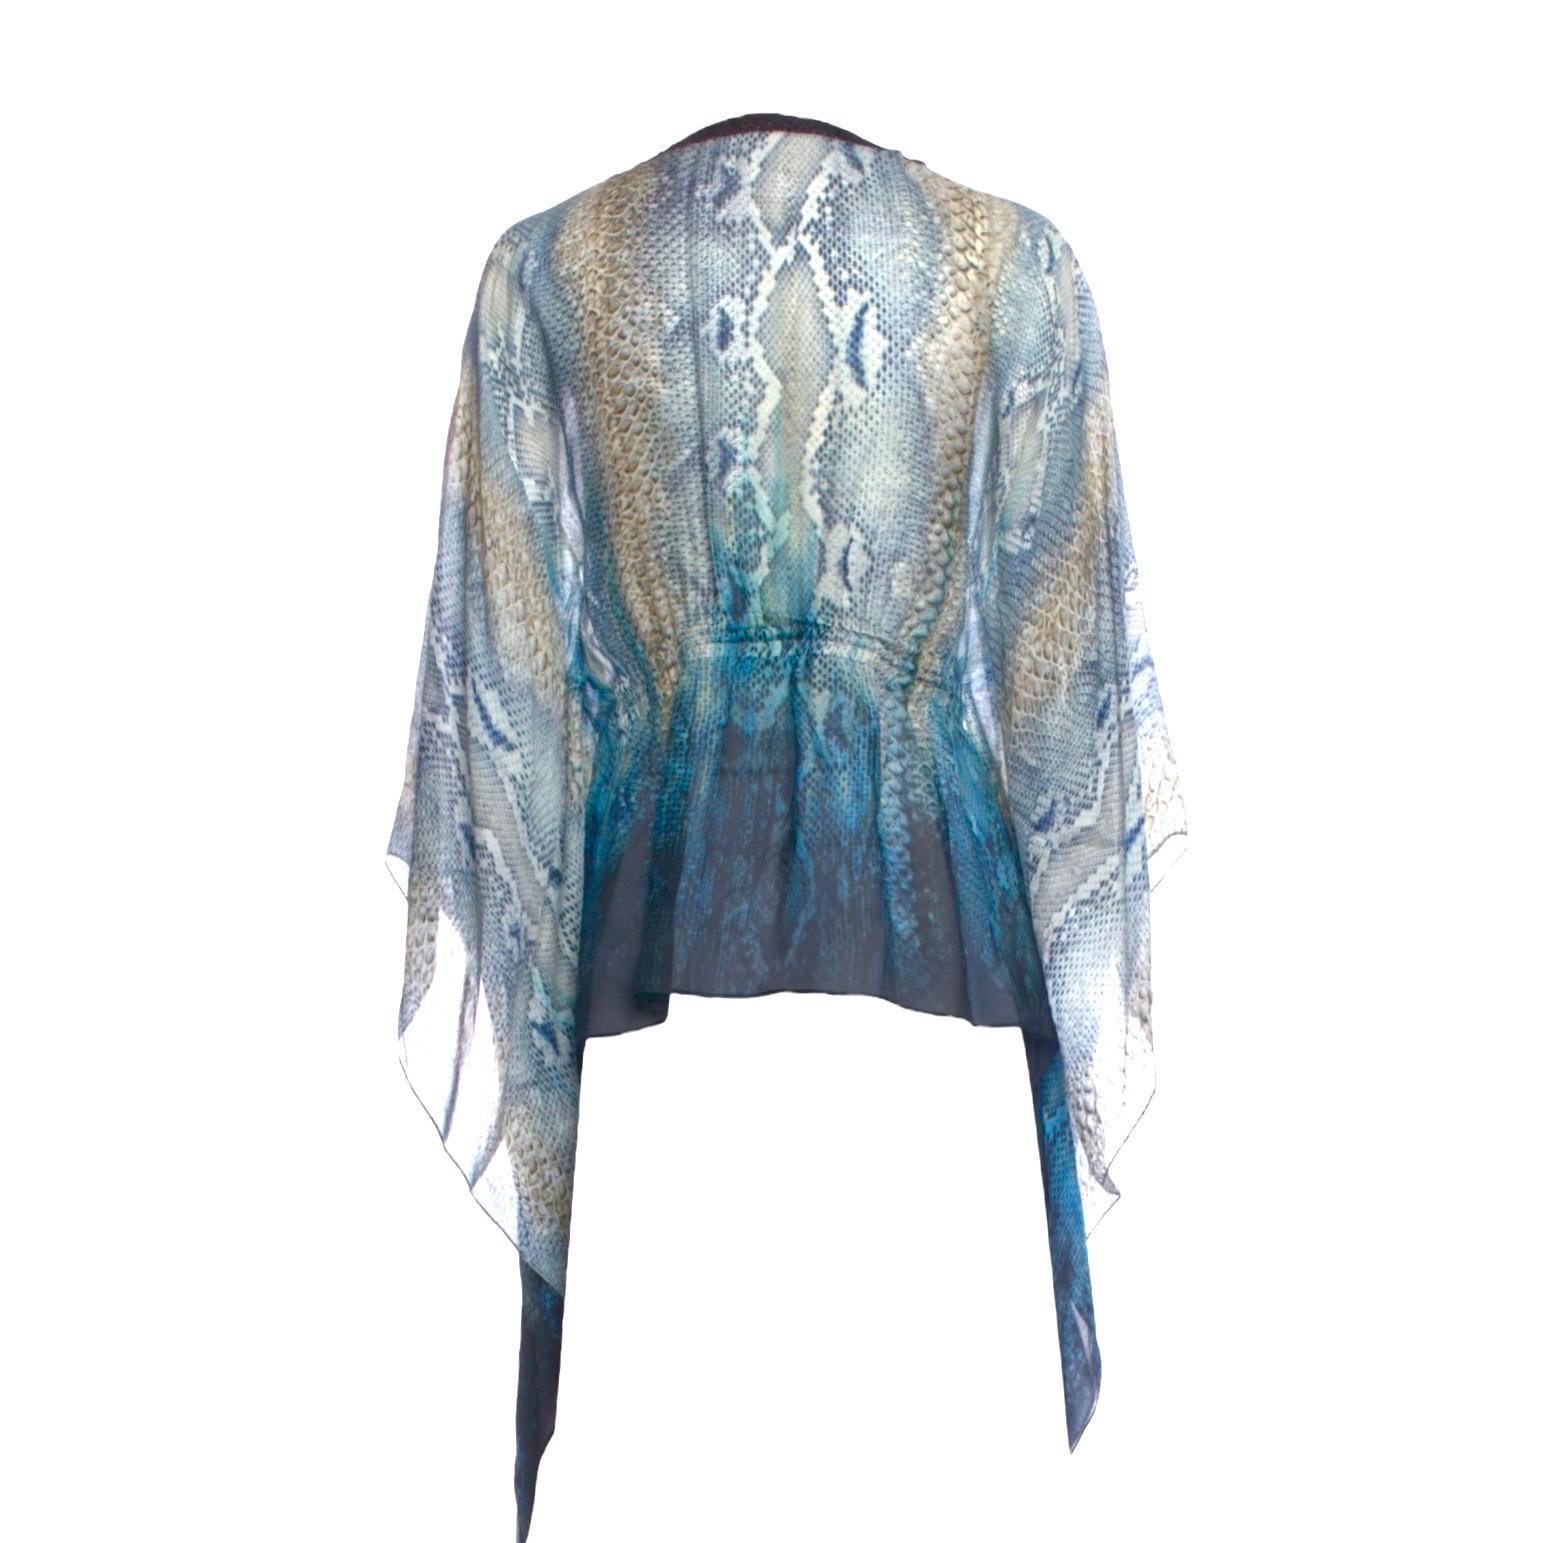 Roberto Cavalli Kaftan
Finest silk printed with signature Cavalli snake skin theme
Signed Roberto Cavalli on silk all over
Hues of blues - wonderful shades
So versatile - pair it with denim, a leather leggings or wear it as a cover up over your